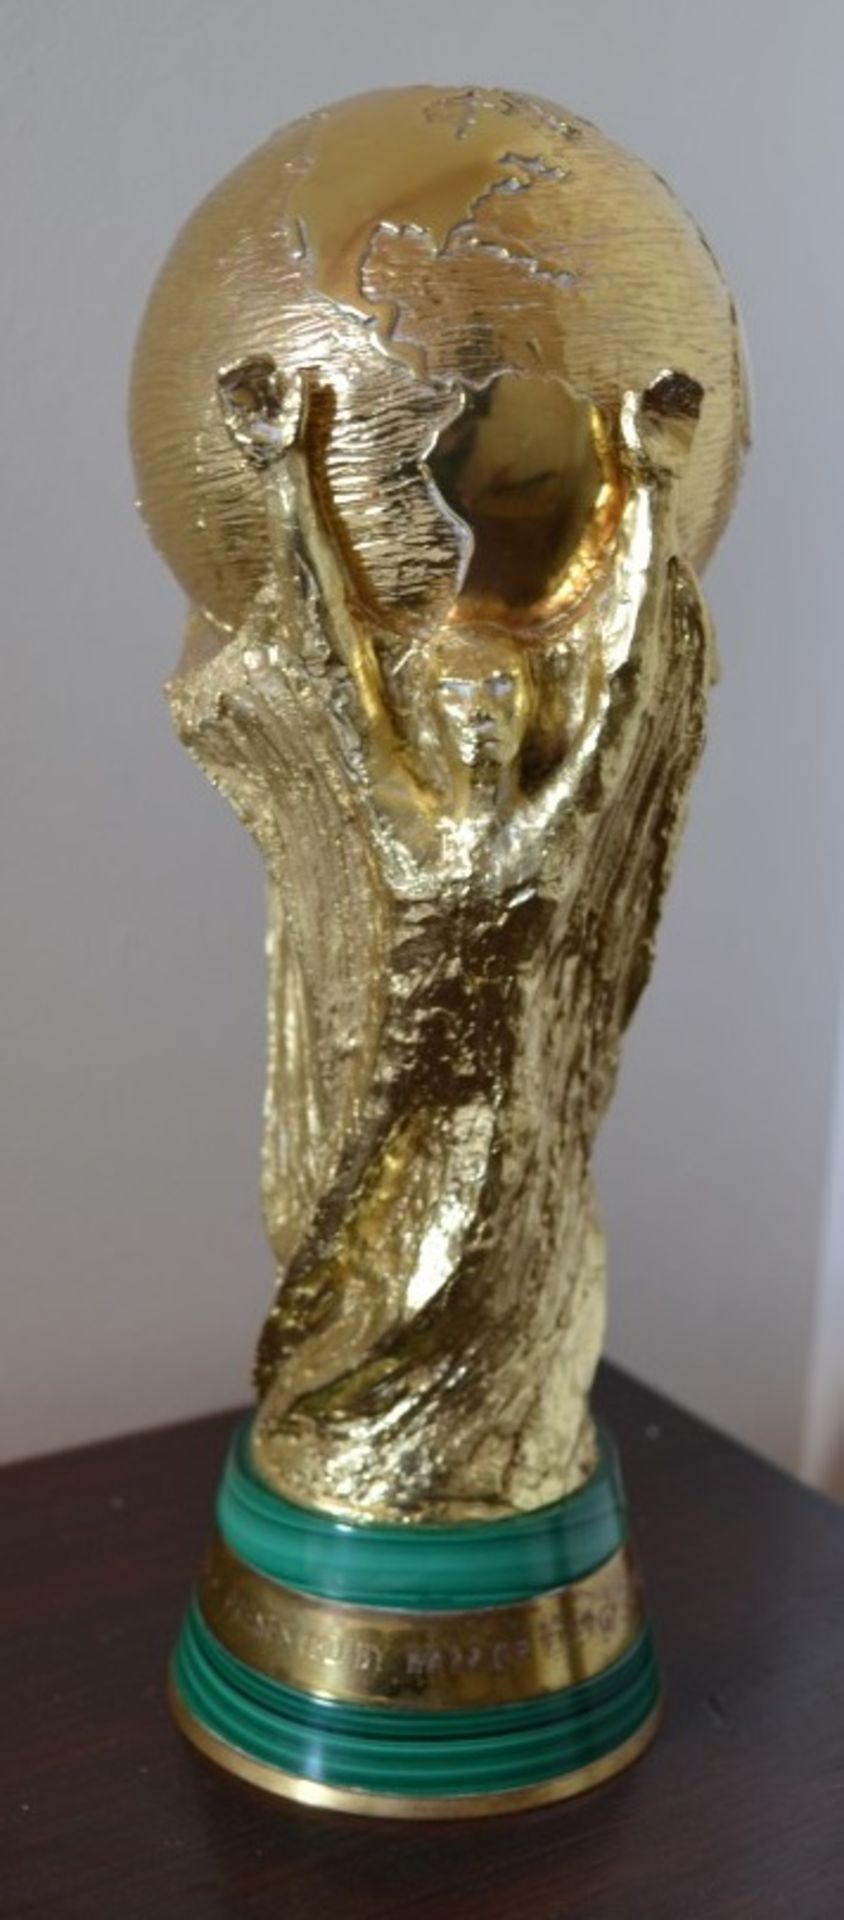 1 x Official World Cup 1:1.3 Scale 27cm Replica By Gerrard & Co. - Gold Plated - No.8 Of Only 10 - Image 8 of 16